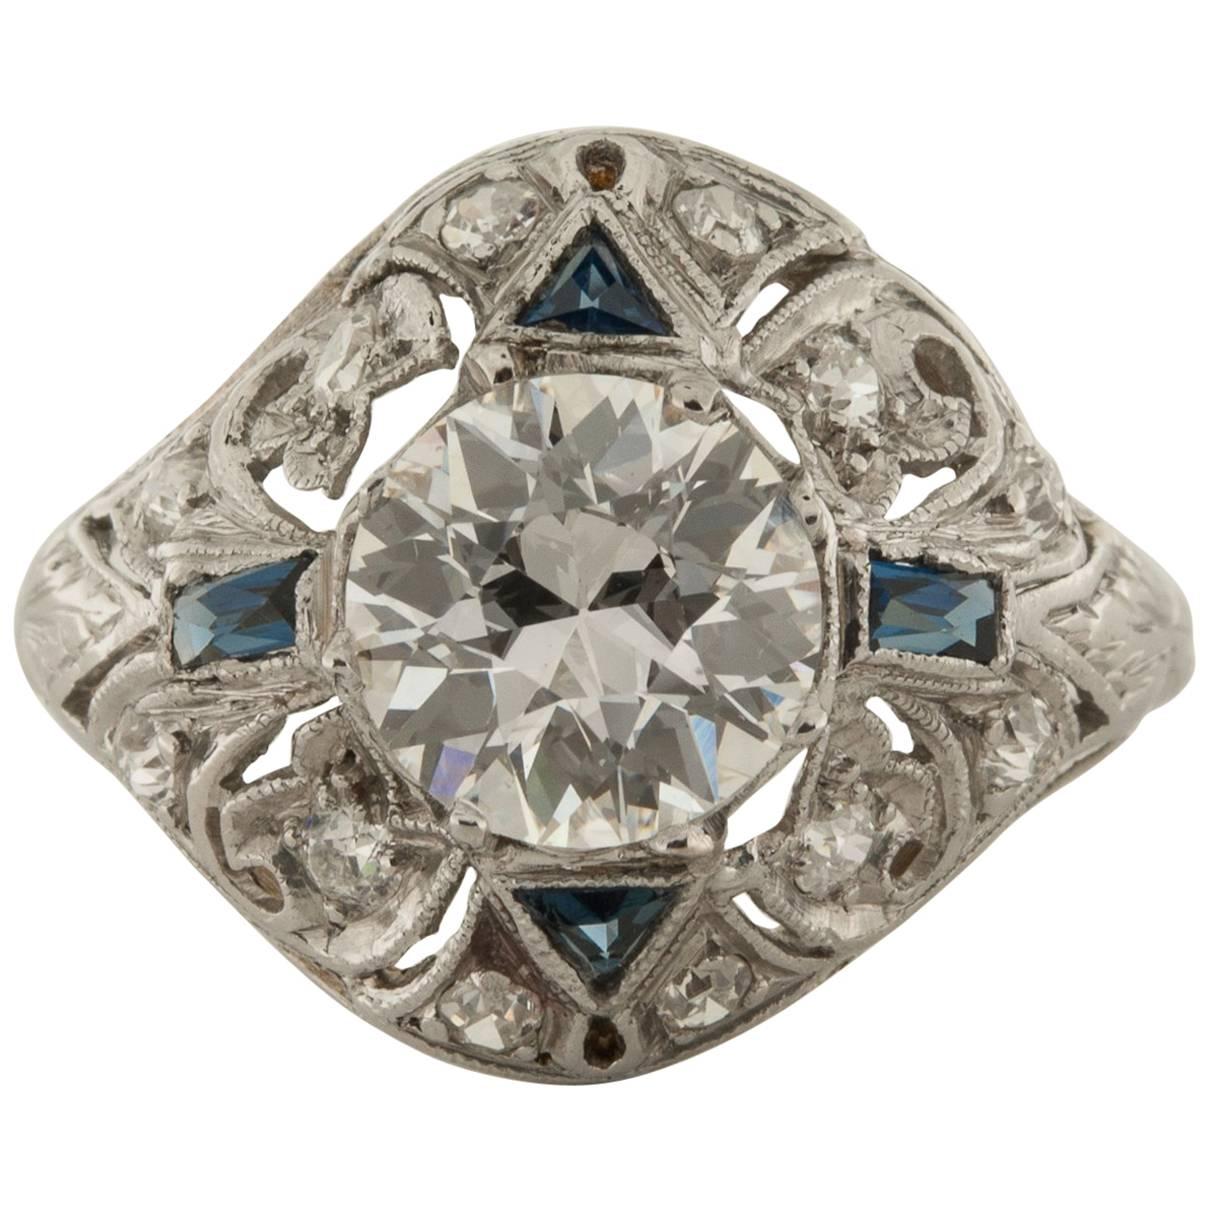 1920s Art Deco 1.18 Carat Diamond and Sapphire Ring For Sale